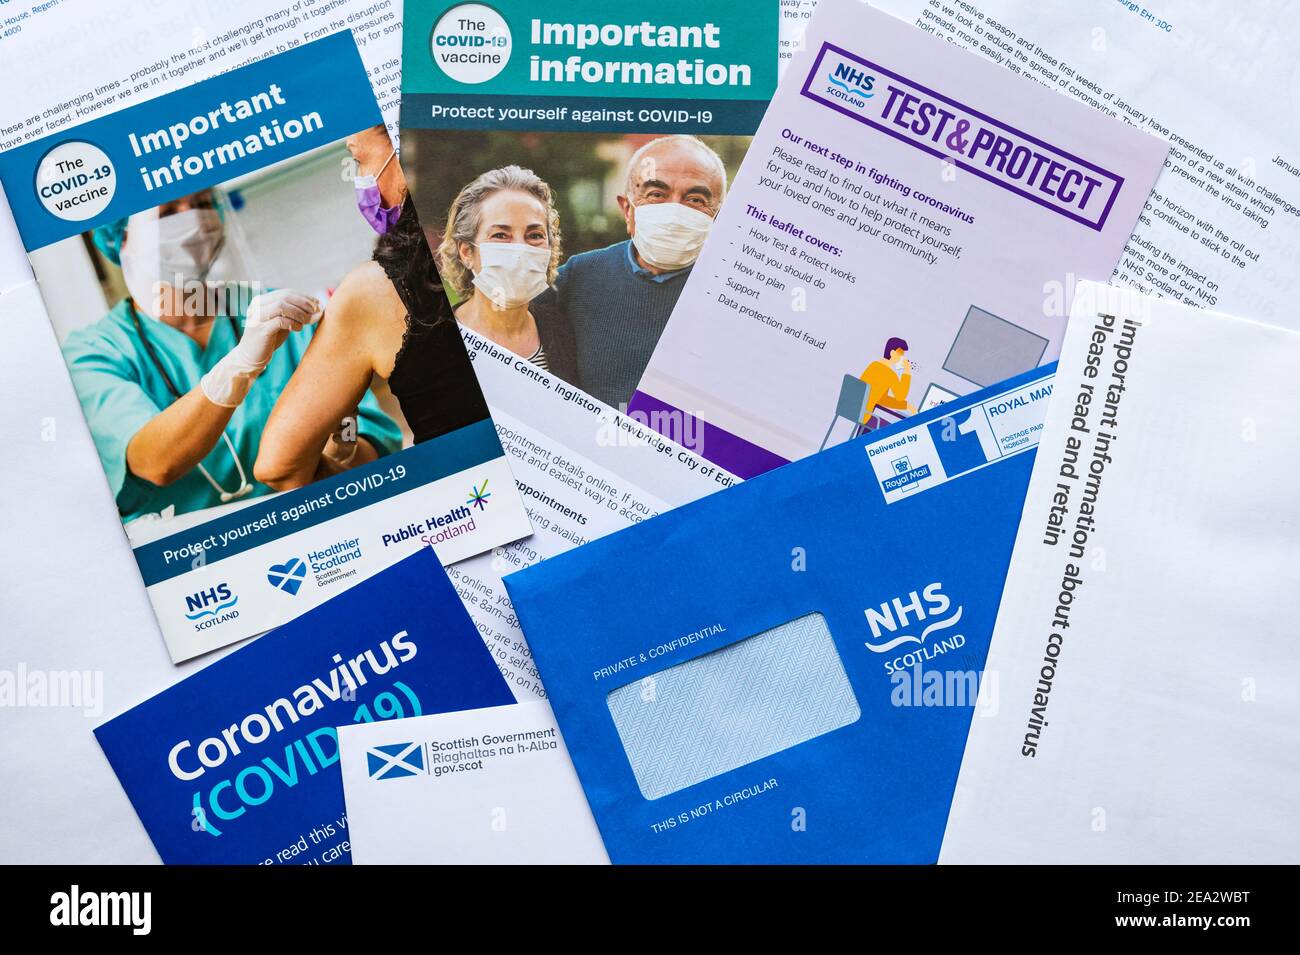 UK and Scottish Government advice leaflets, letters & vaccine appointment letter during Covid-19 coronavirus pandemic, Scotland, UK Stock Photo